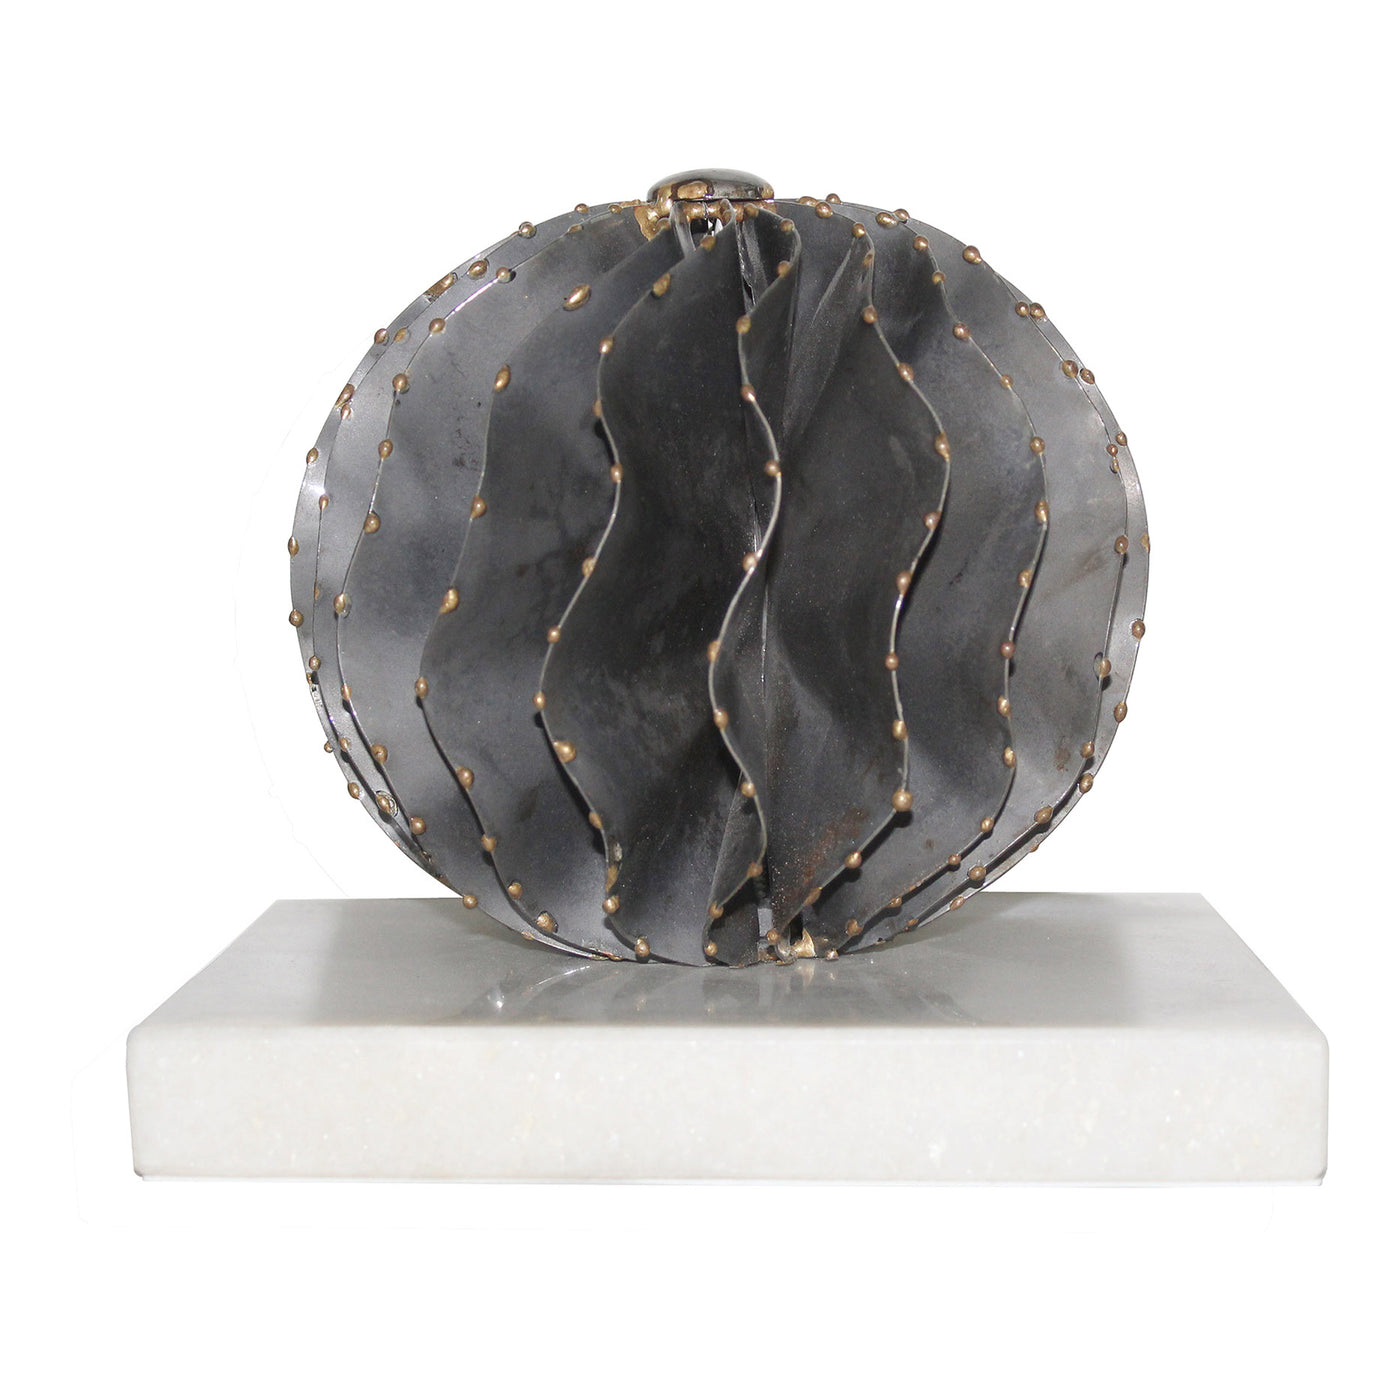 A piece perfect for additional decoration on your shelf. The Iron strips are welded together in a sphere and detailed with...